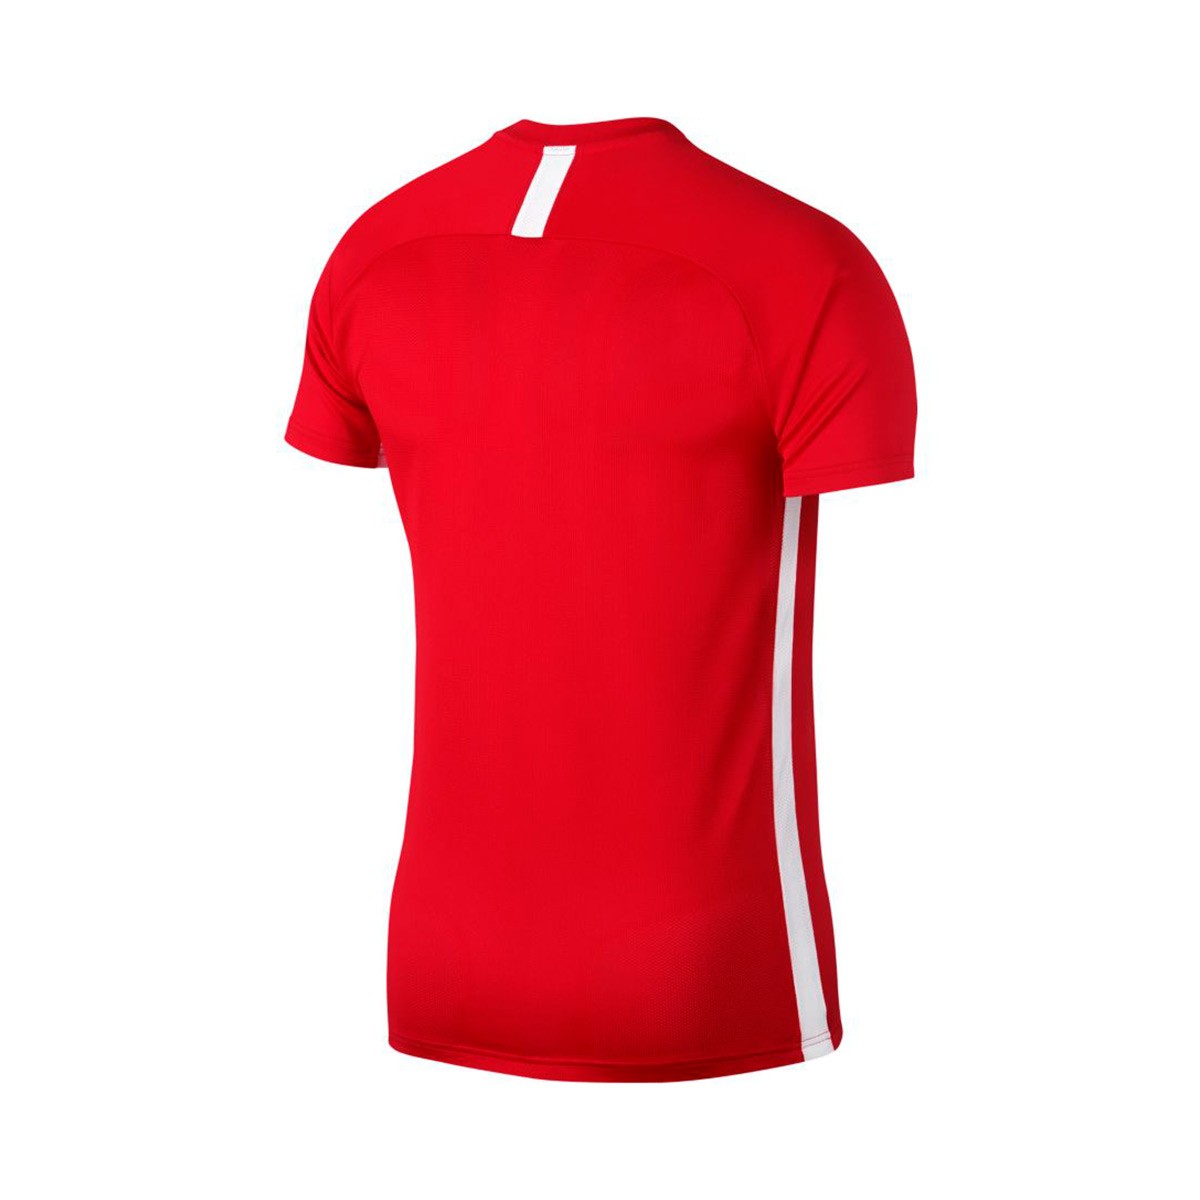 red and white nike long sleeve shirt